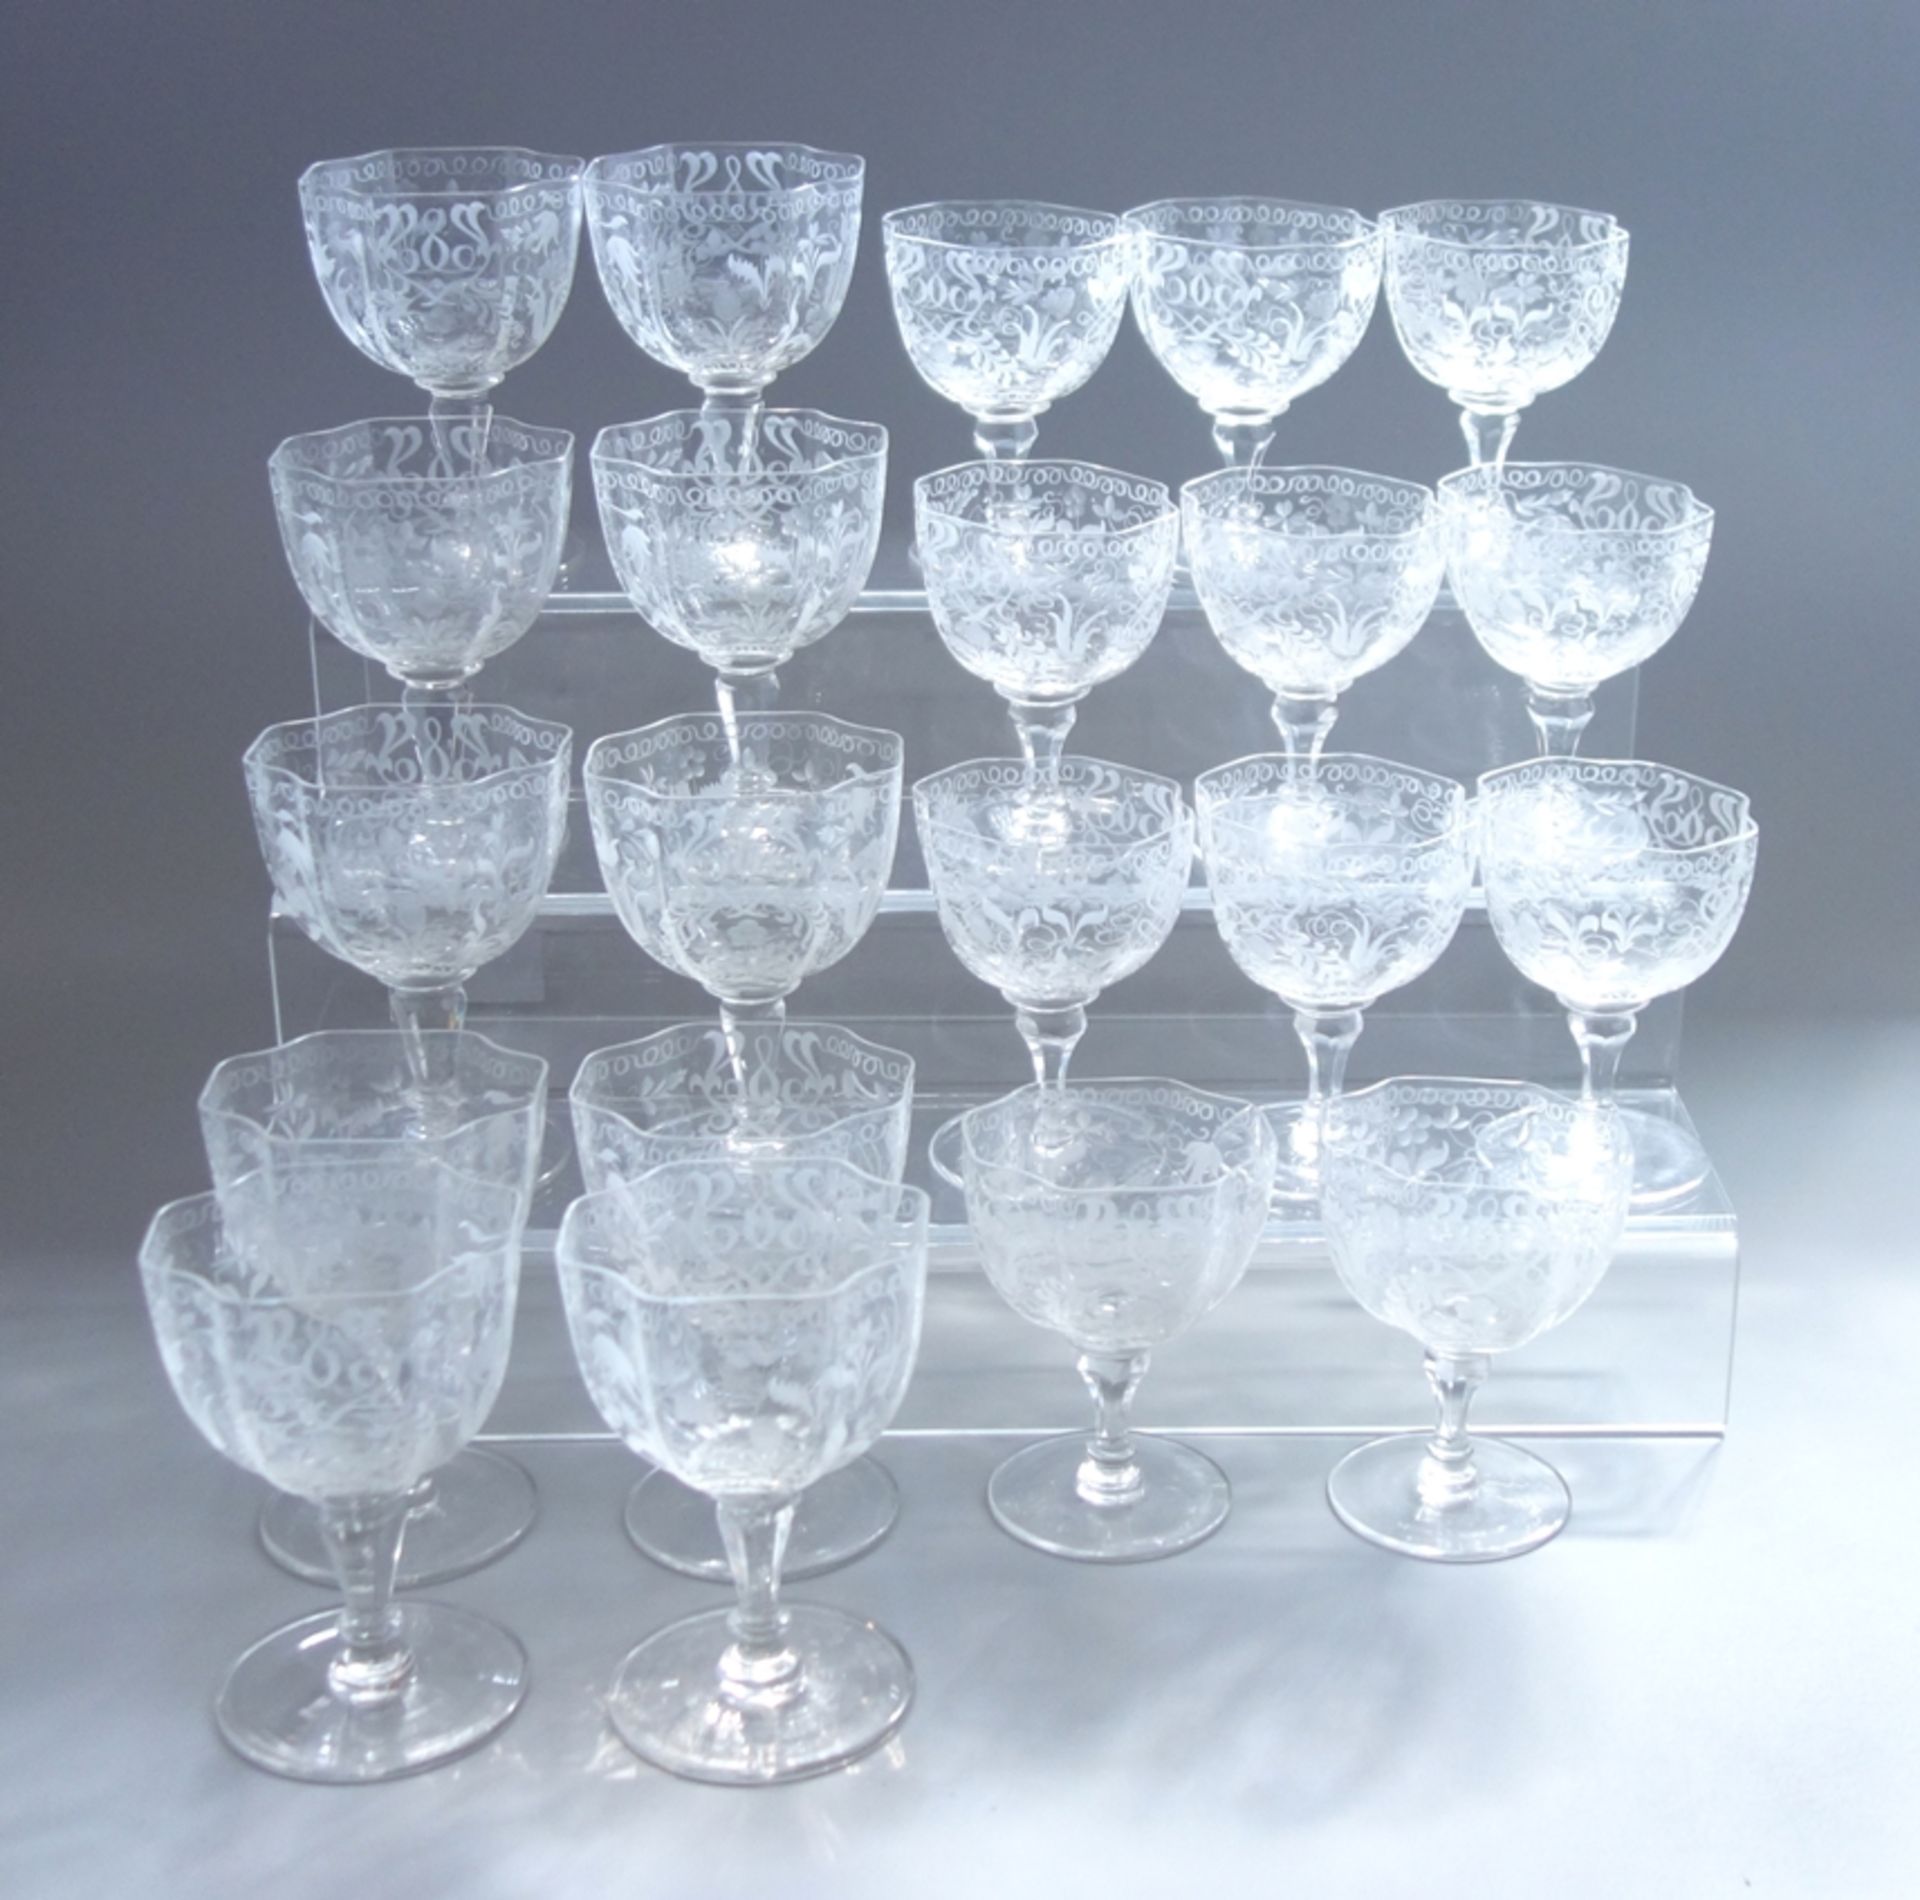 21 high quality wine glasses with delicate floral engraving, 1st half 20th c.